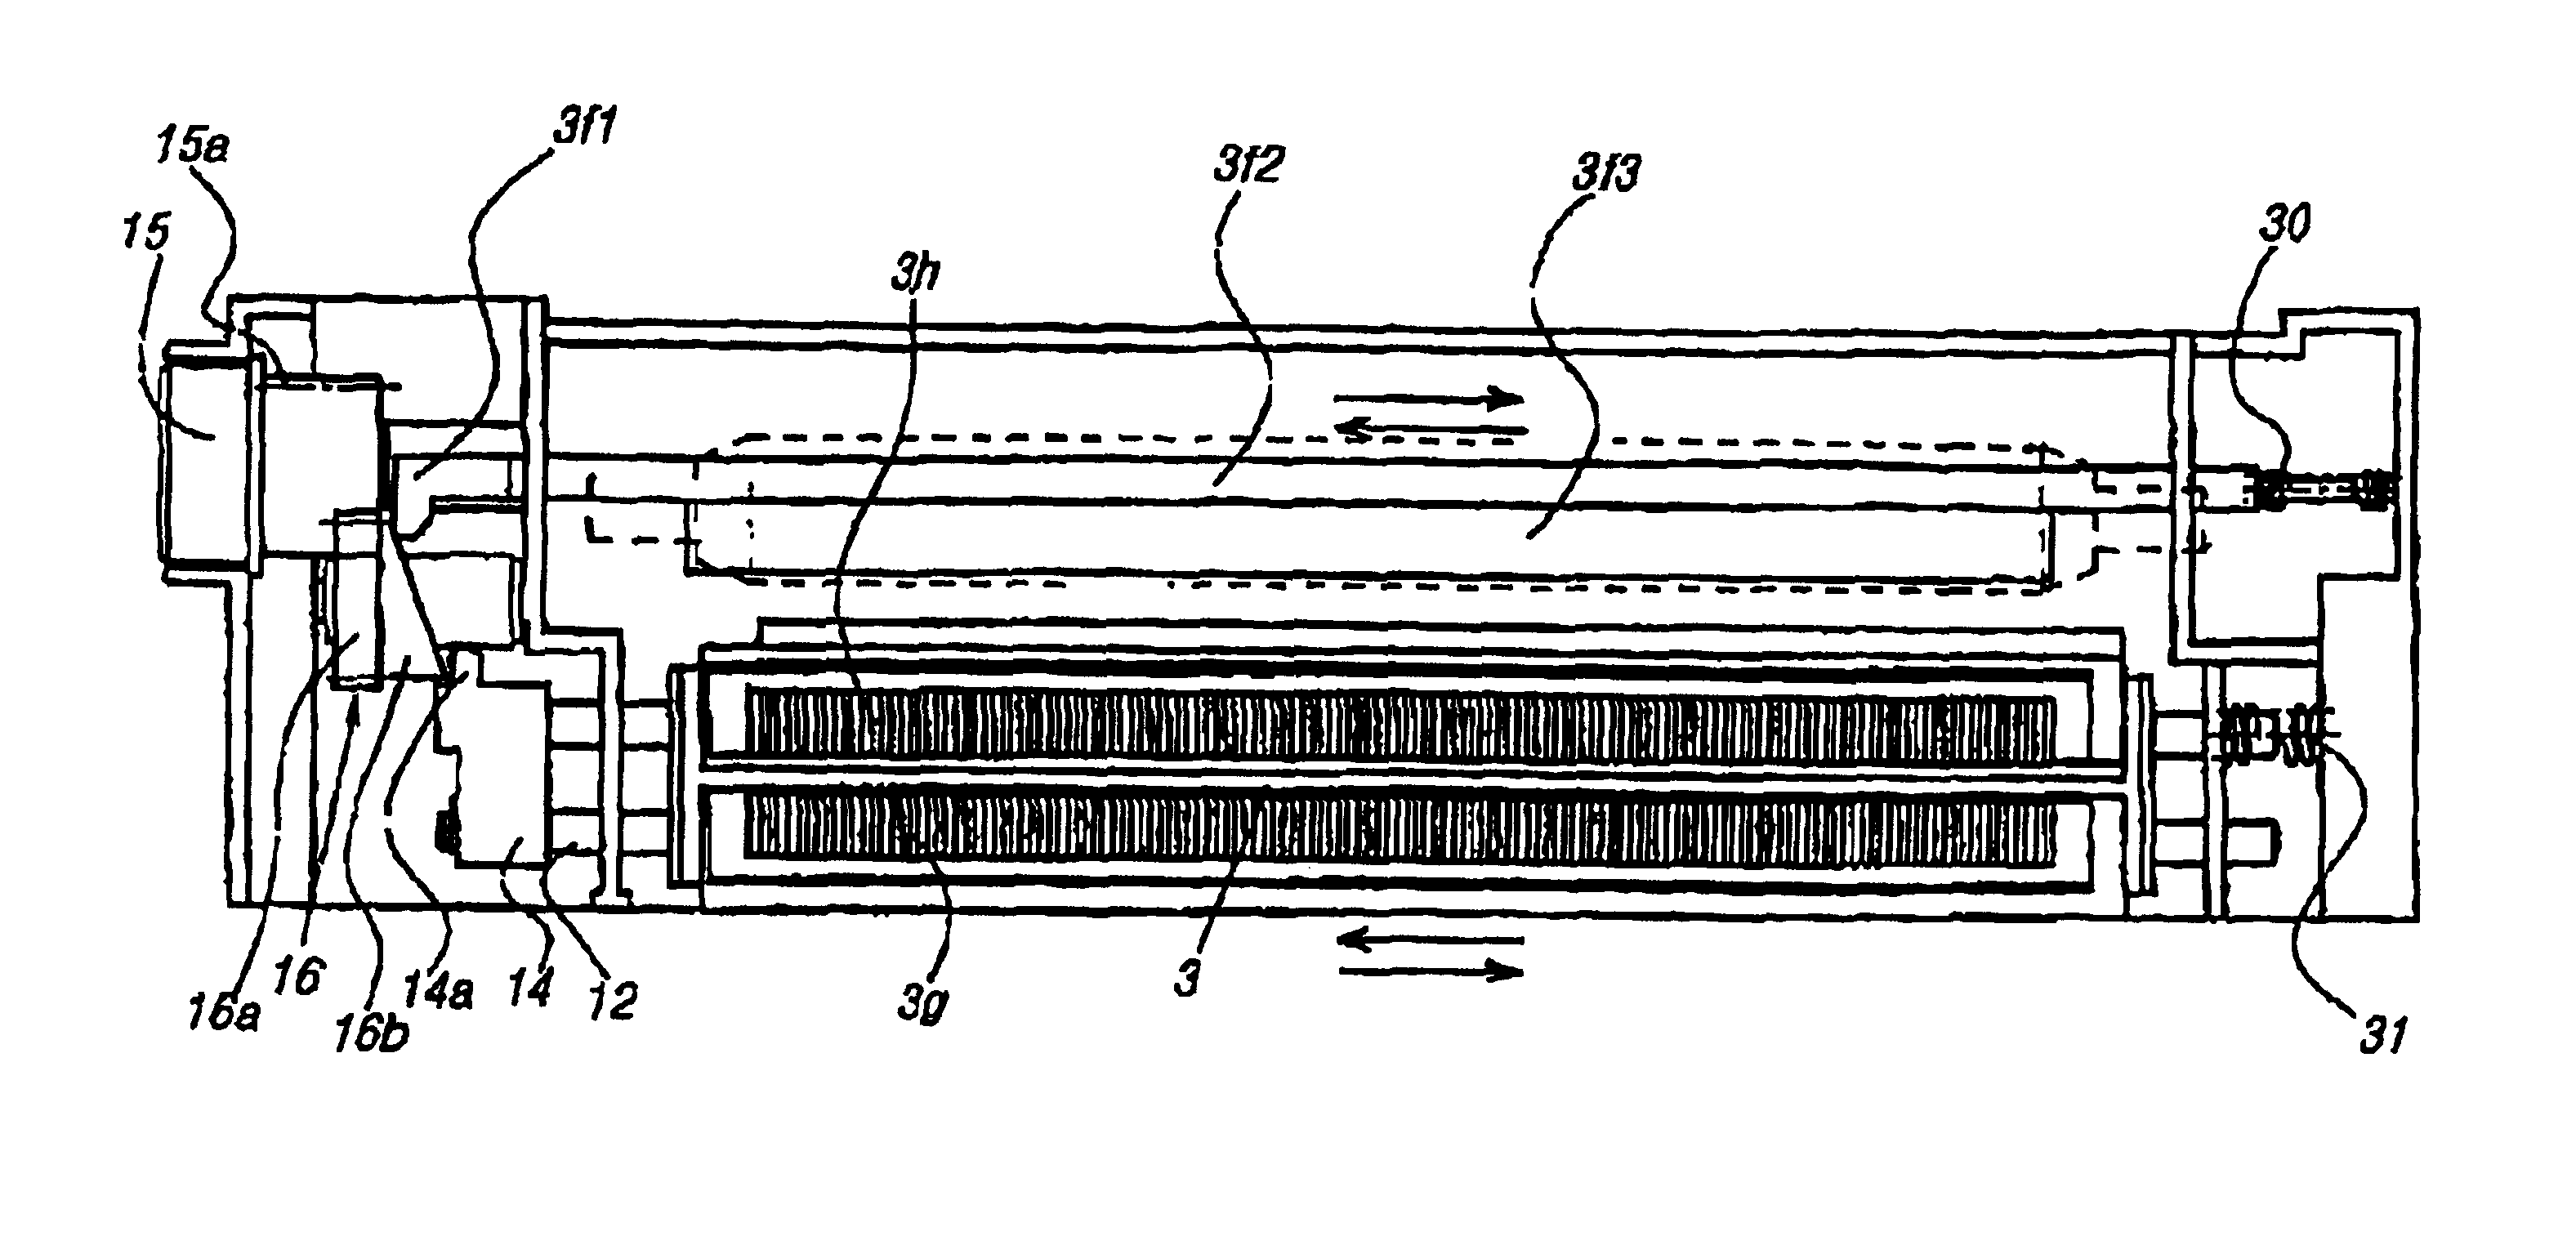 Electric contact member applying voltage to charger, process cartridge, and image forming apparatus